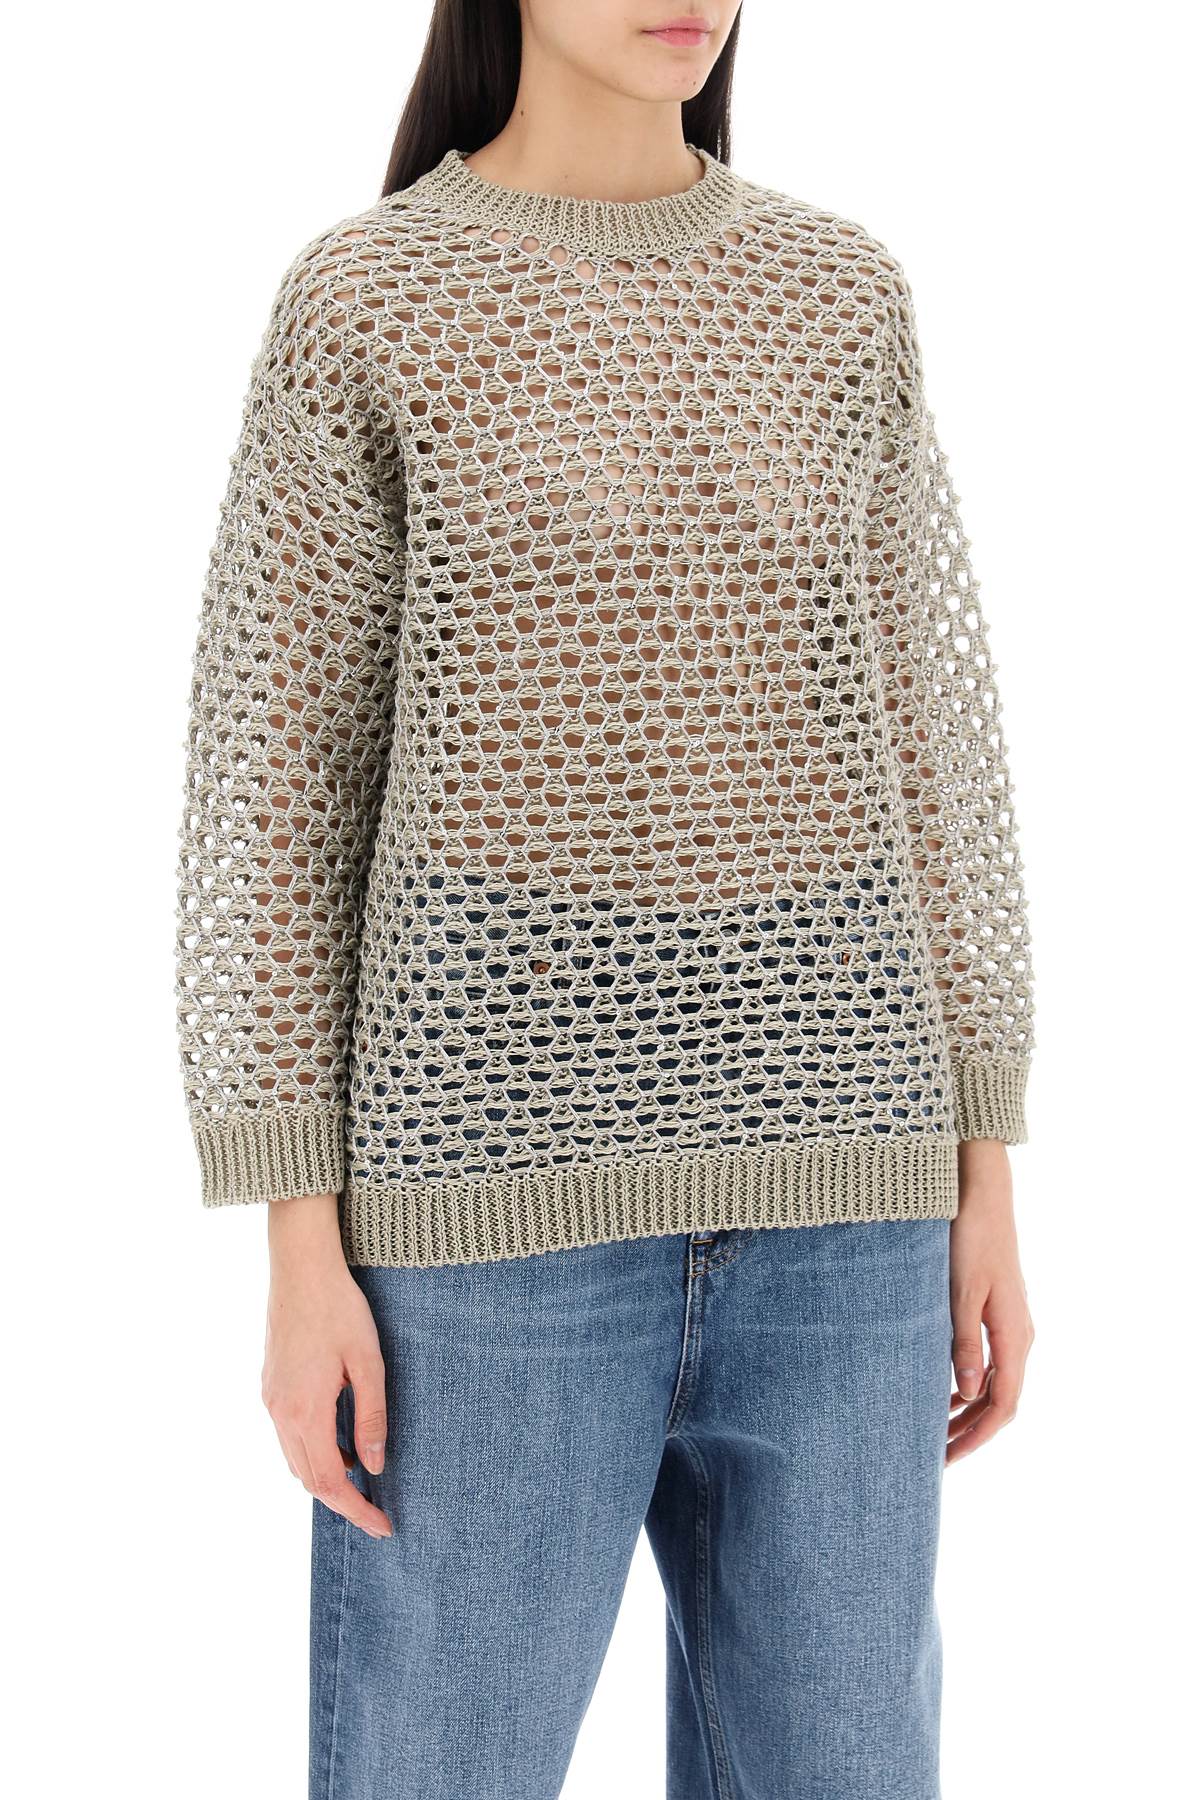 "Mesh Knit Pullover With Sequins Embell